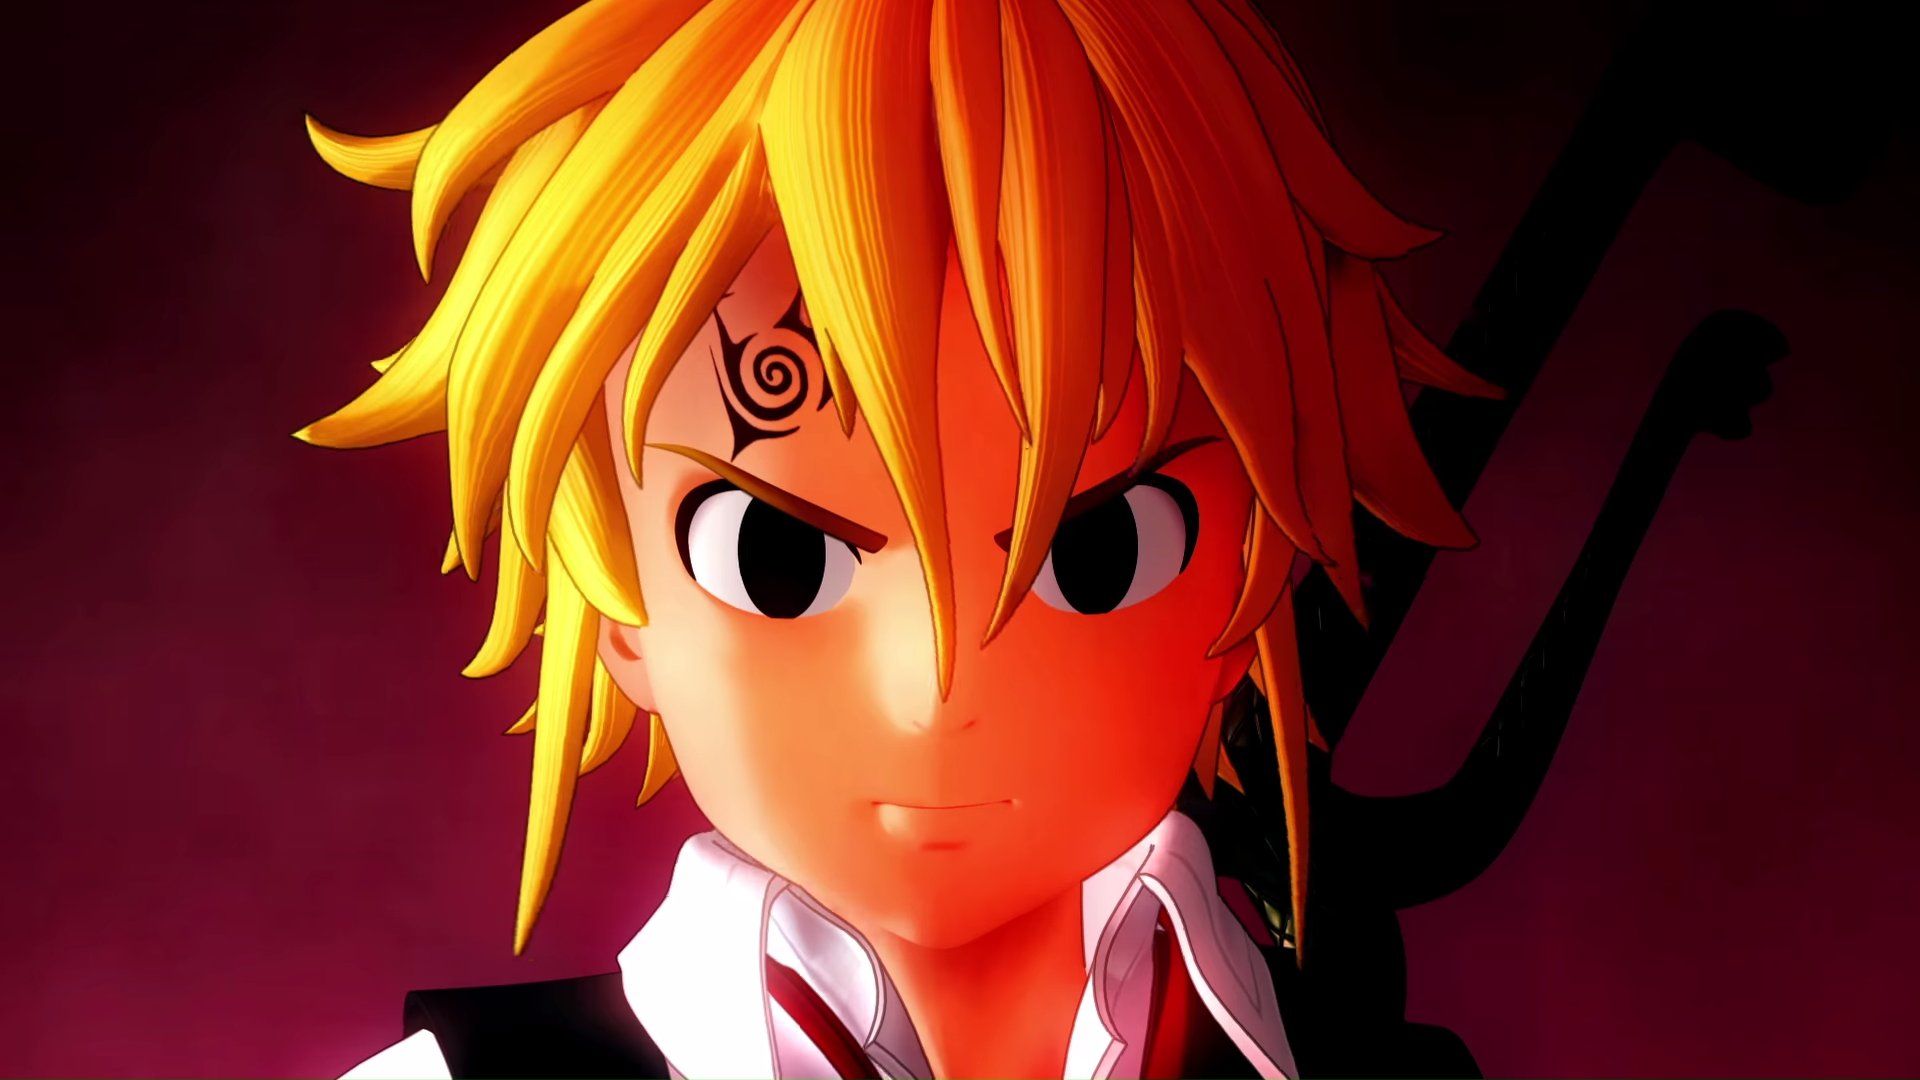 Bandai Namco Sends Out New for The Seven Deadly Sins